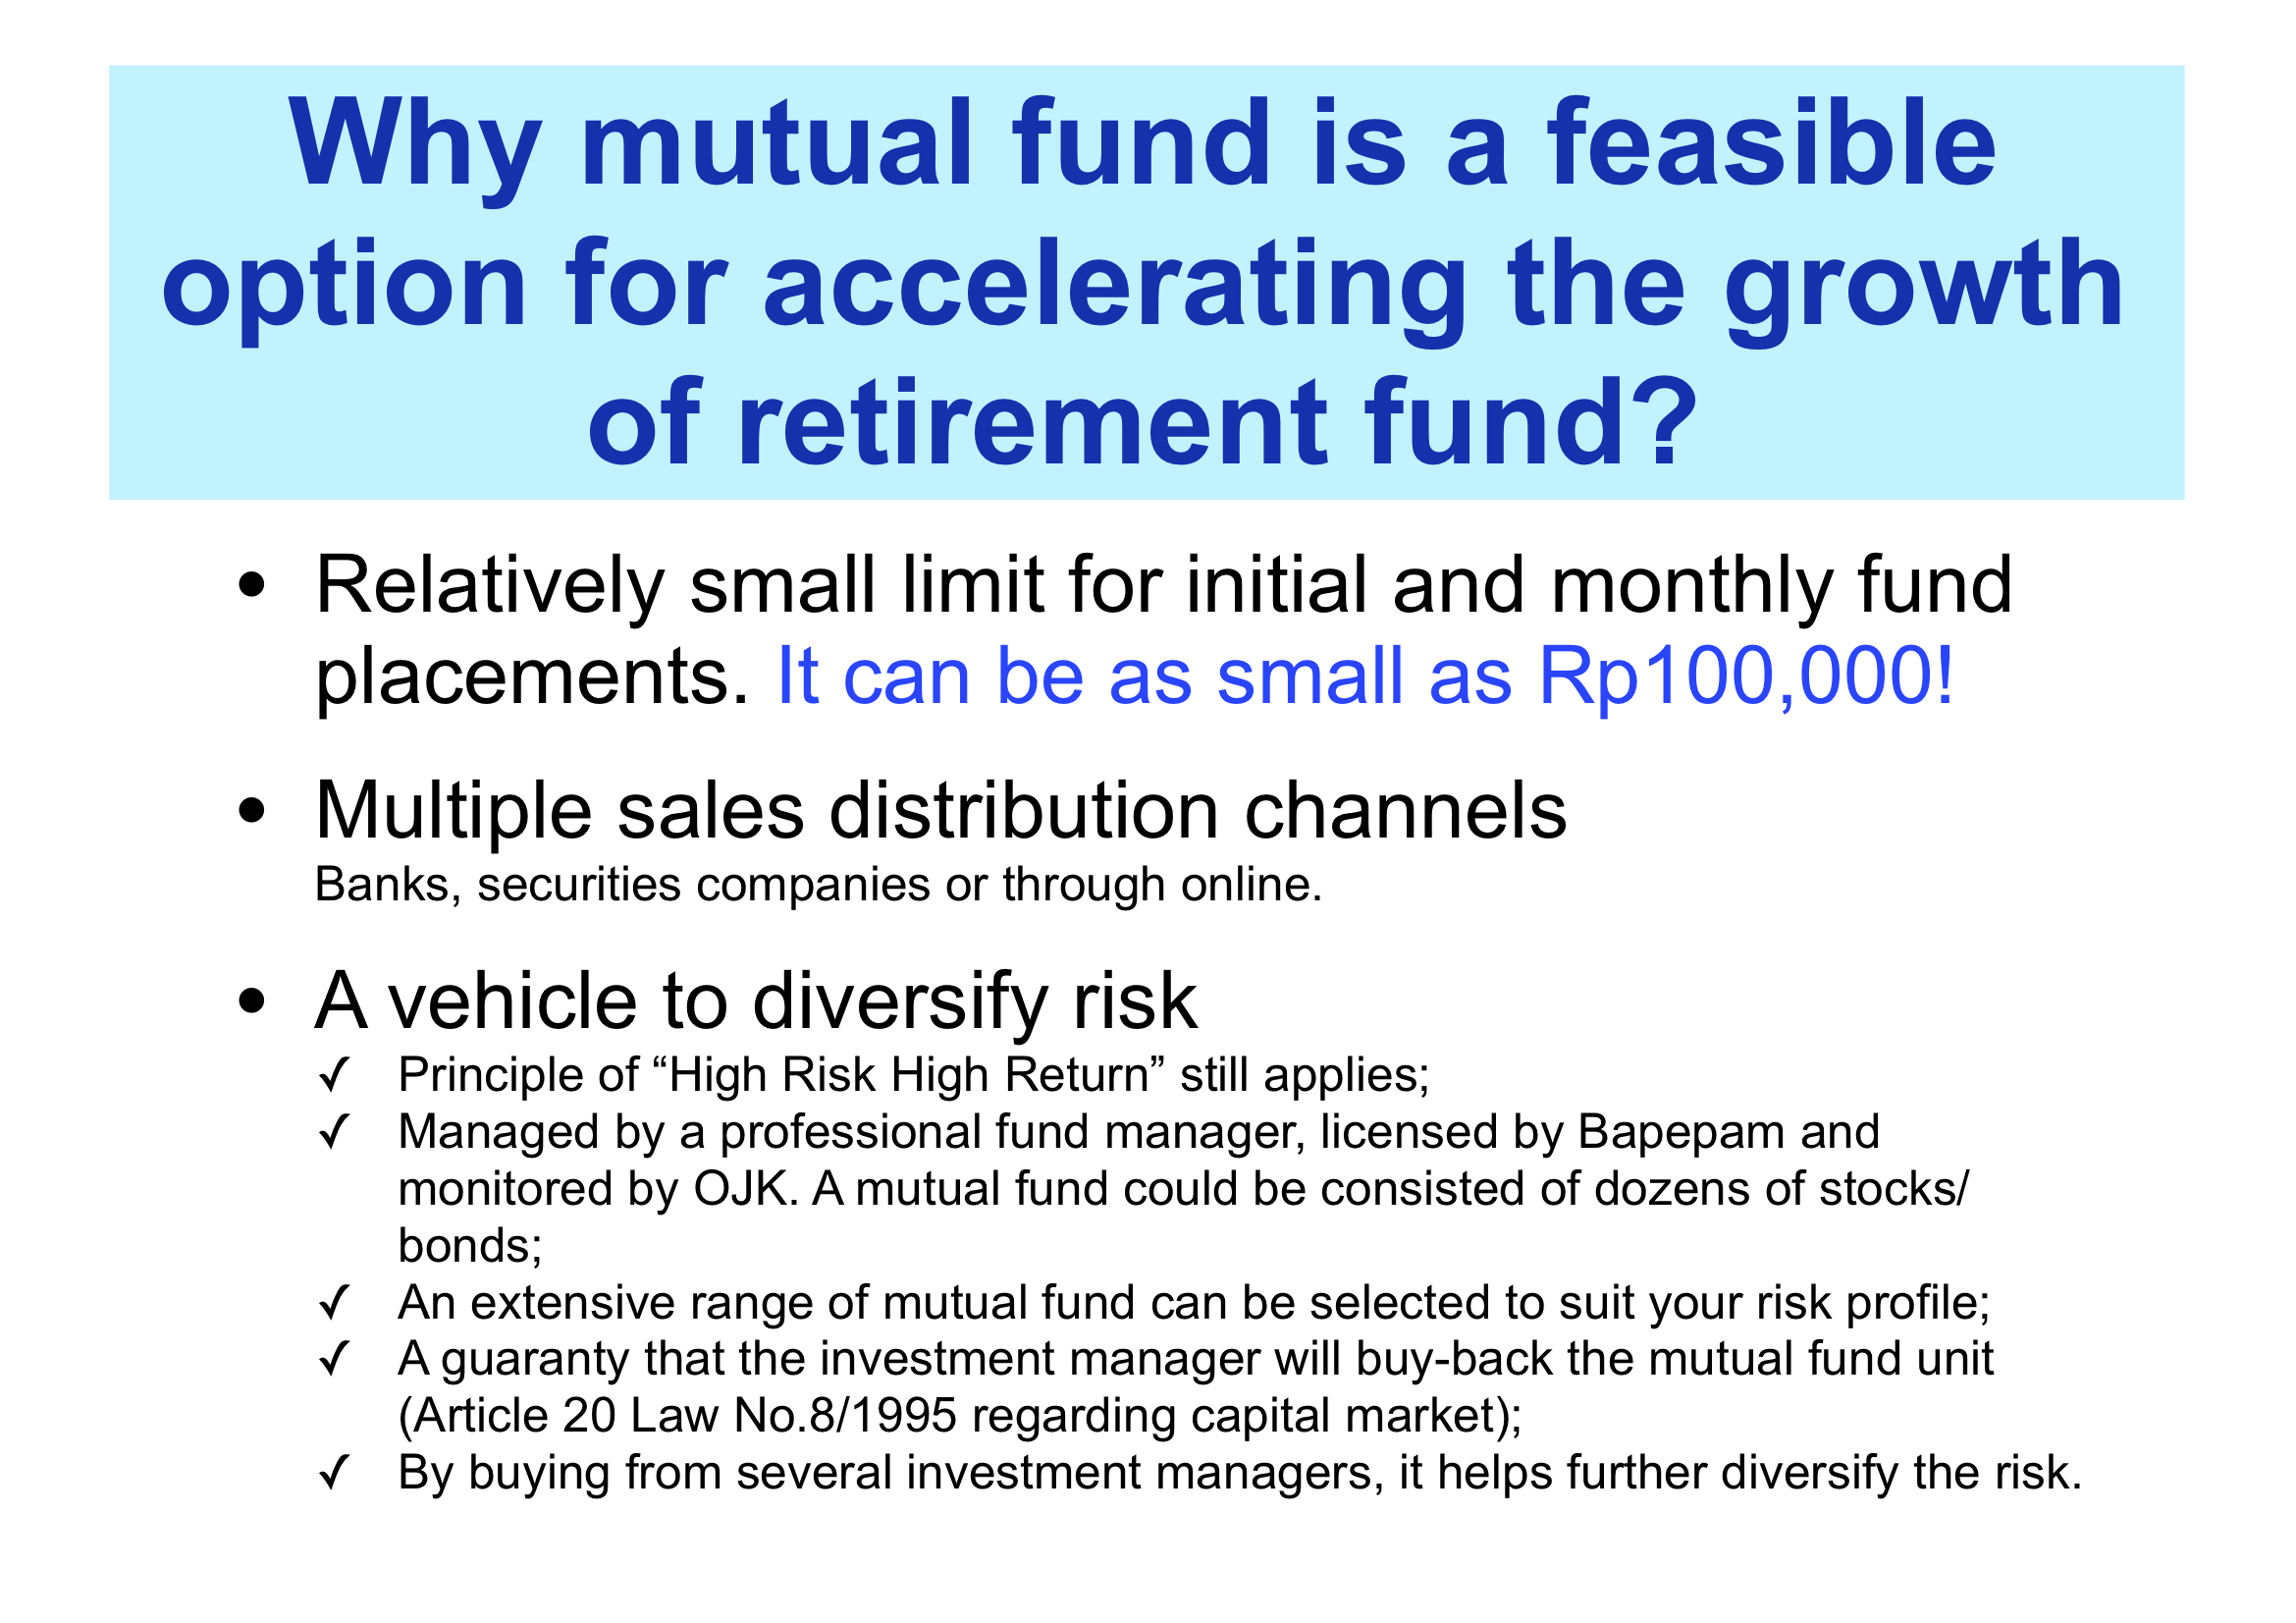 Why Mutual Fund is a Feasible Option for Accelerating the Growth of Retirement Fund